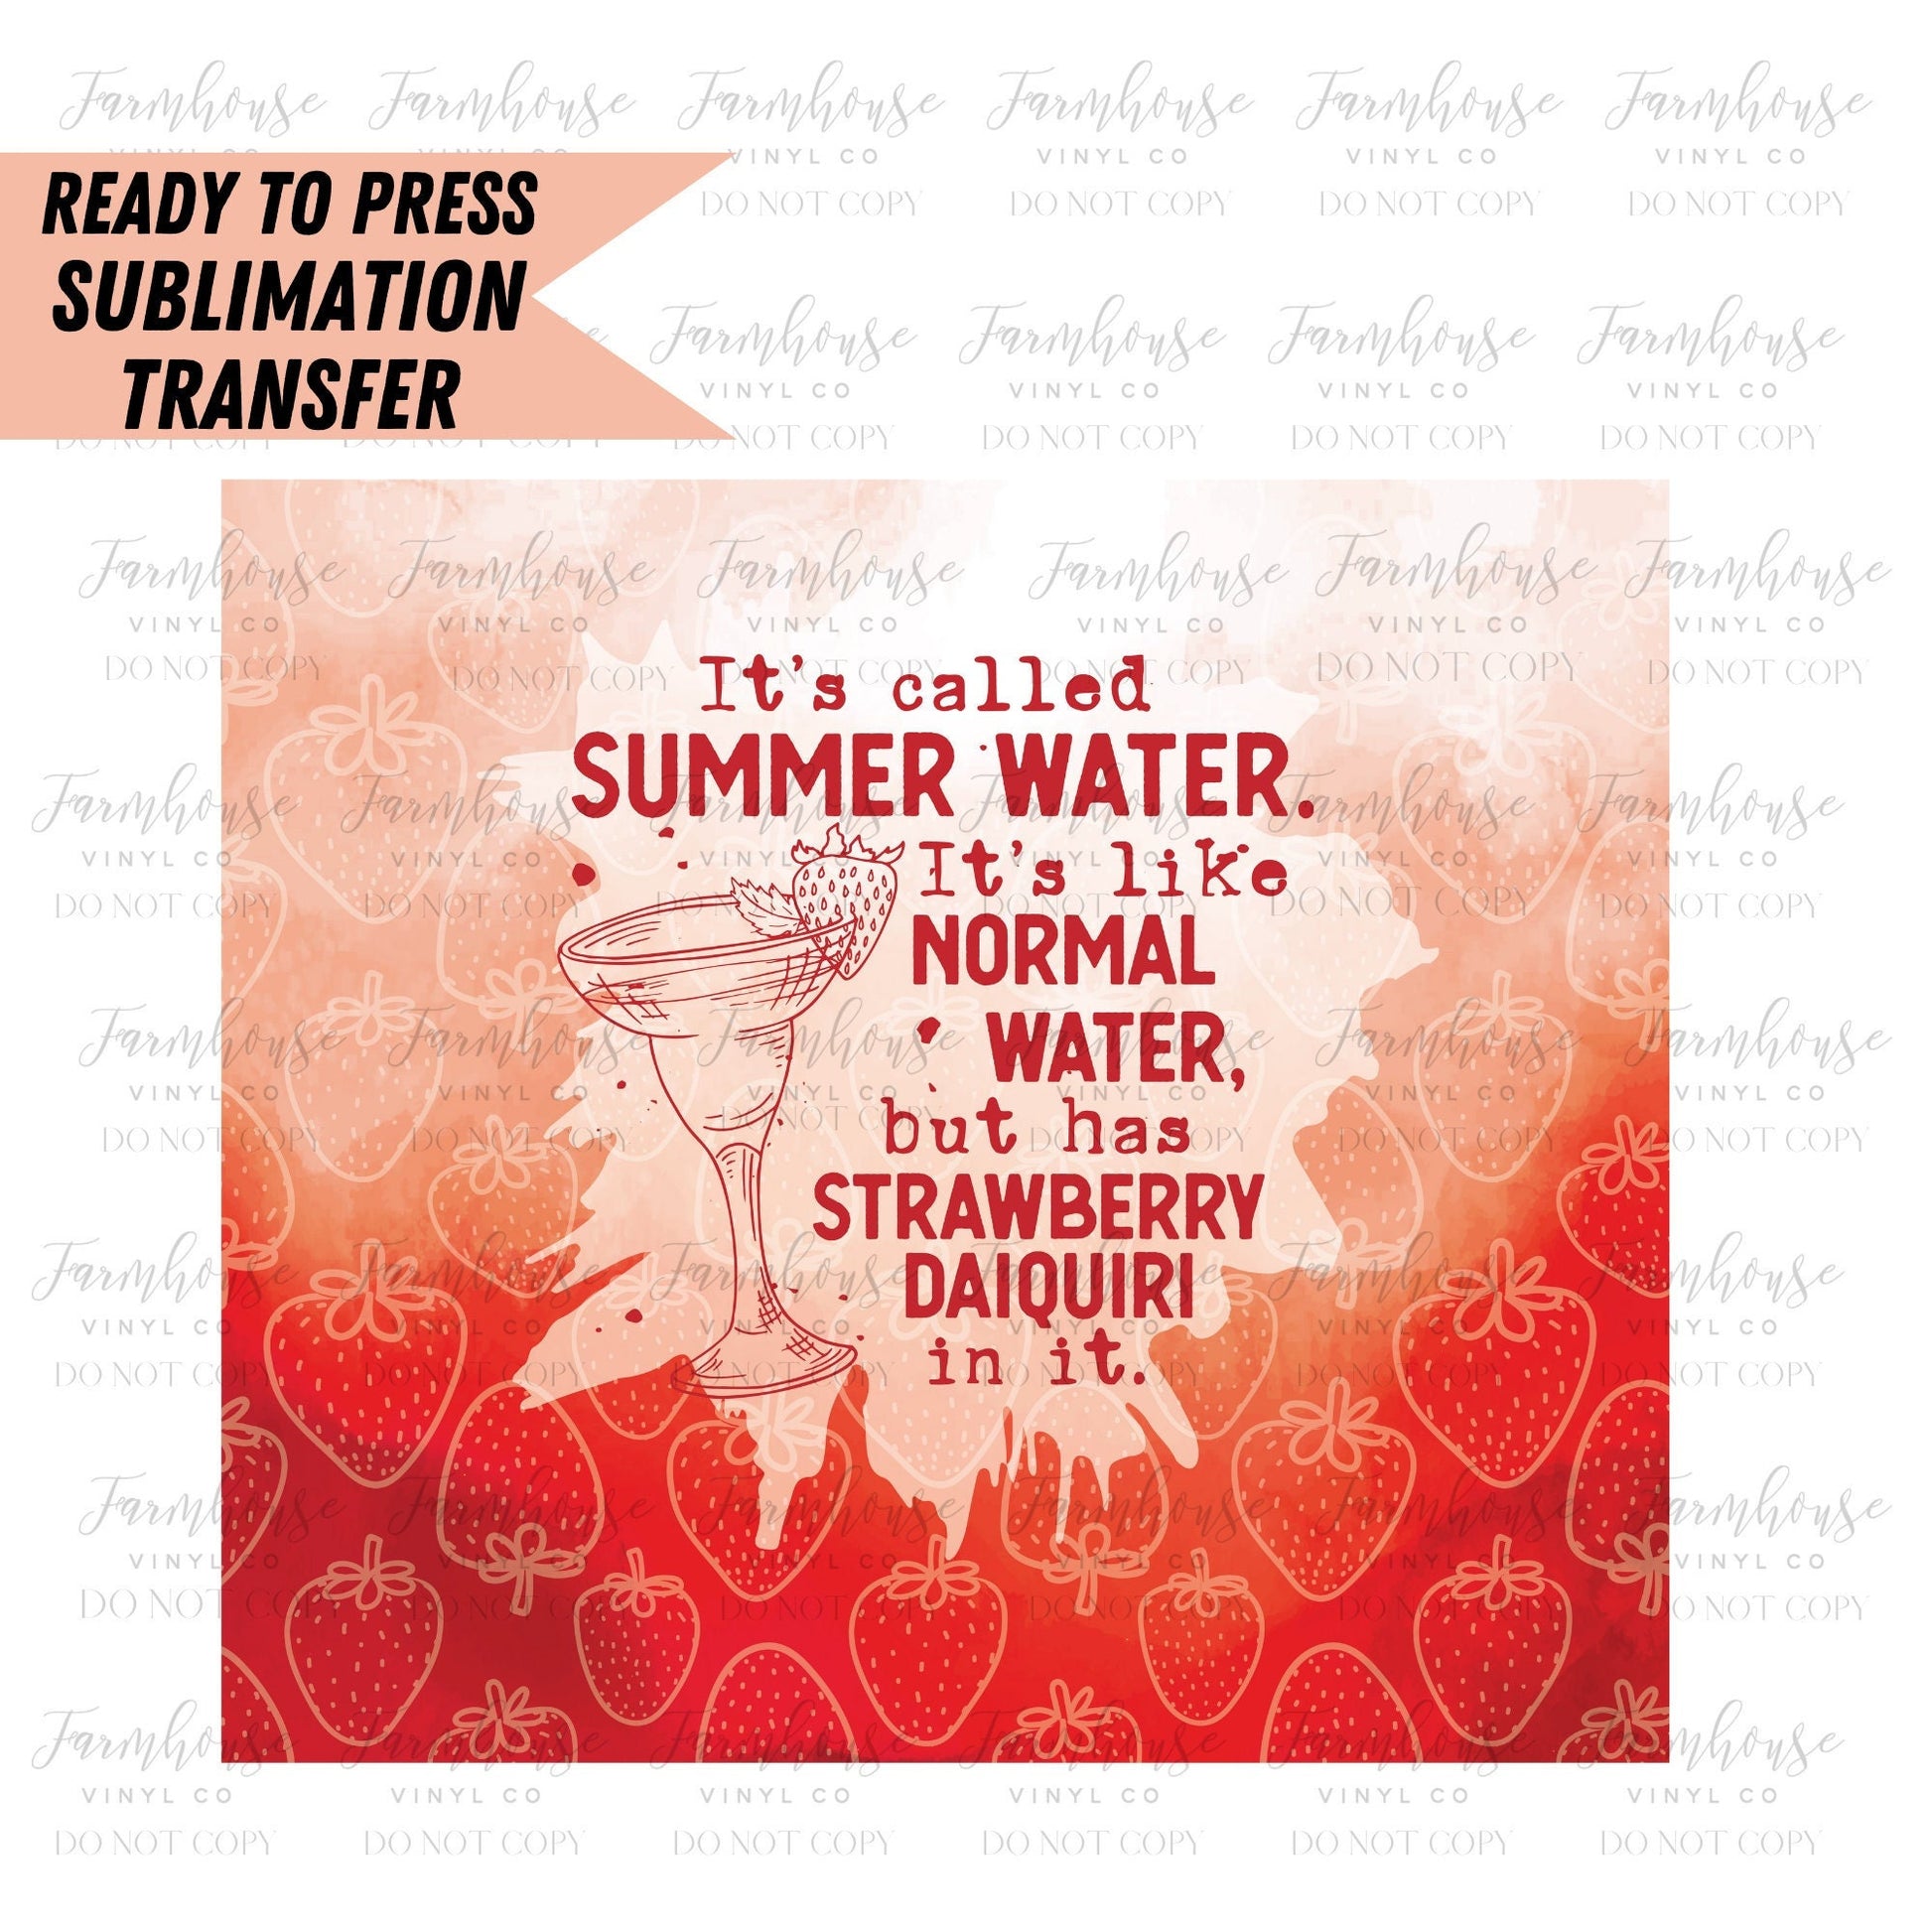 Summer Water Tequila, Ready to Press Tumbler Sublimation Transfer, Heat Transfer, Skinny 20 OZ, Skinny 30 OZ, Funny Summer Tequila Transfer - Farmhouse Vinyl Co